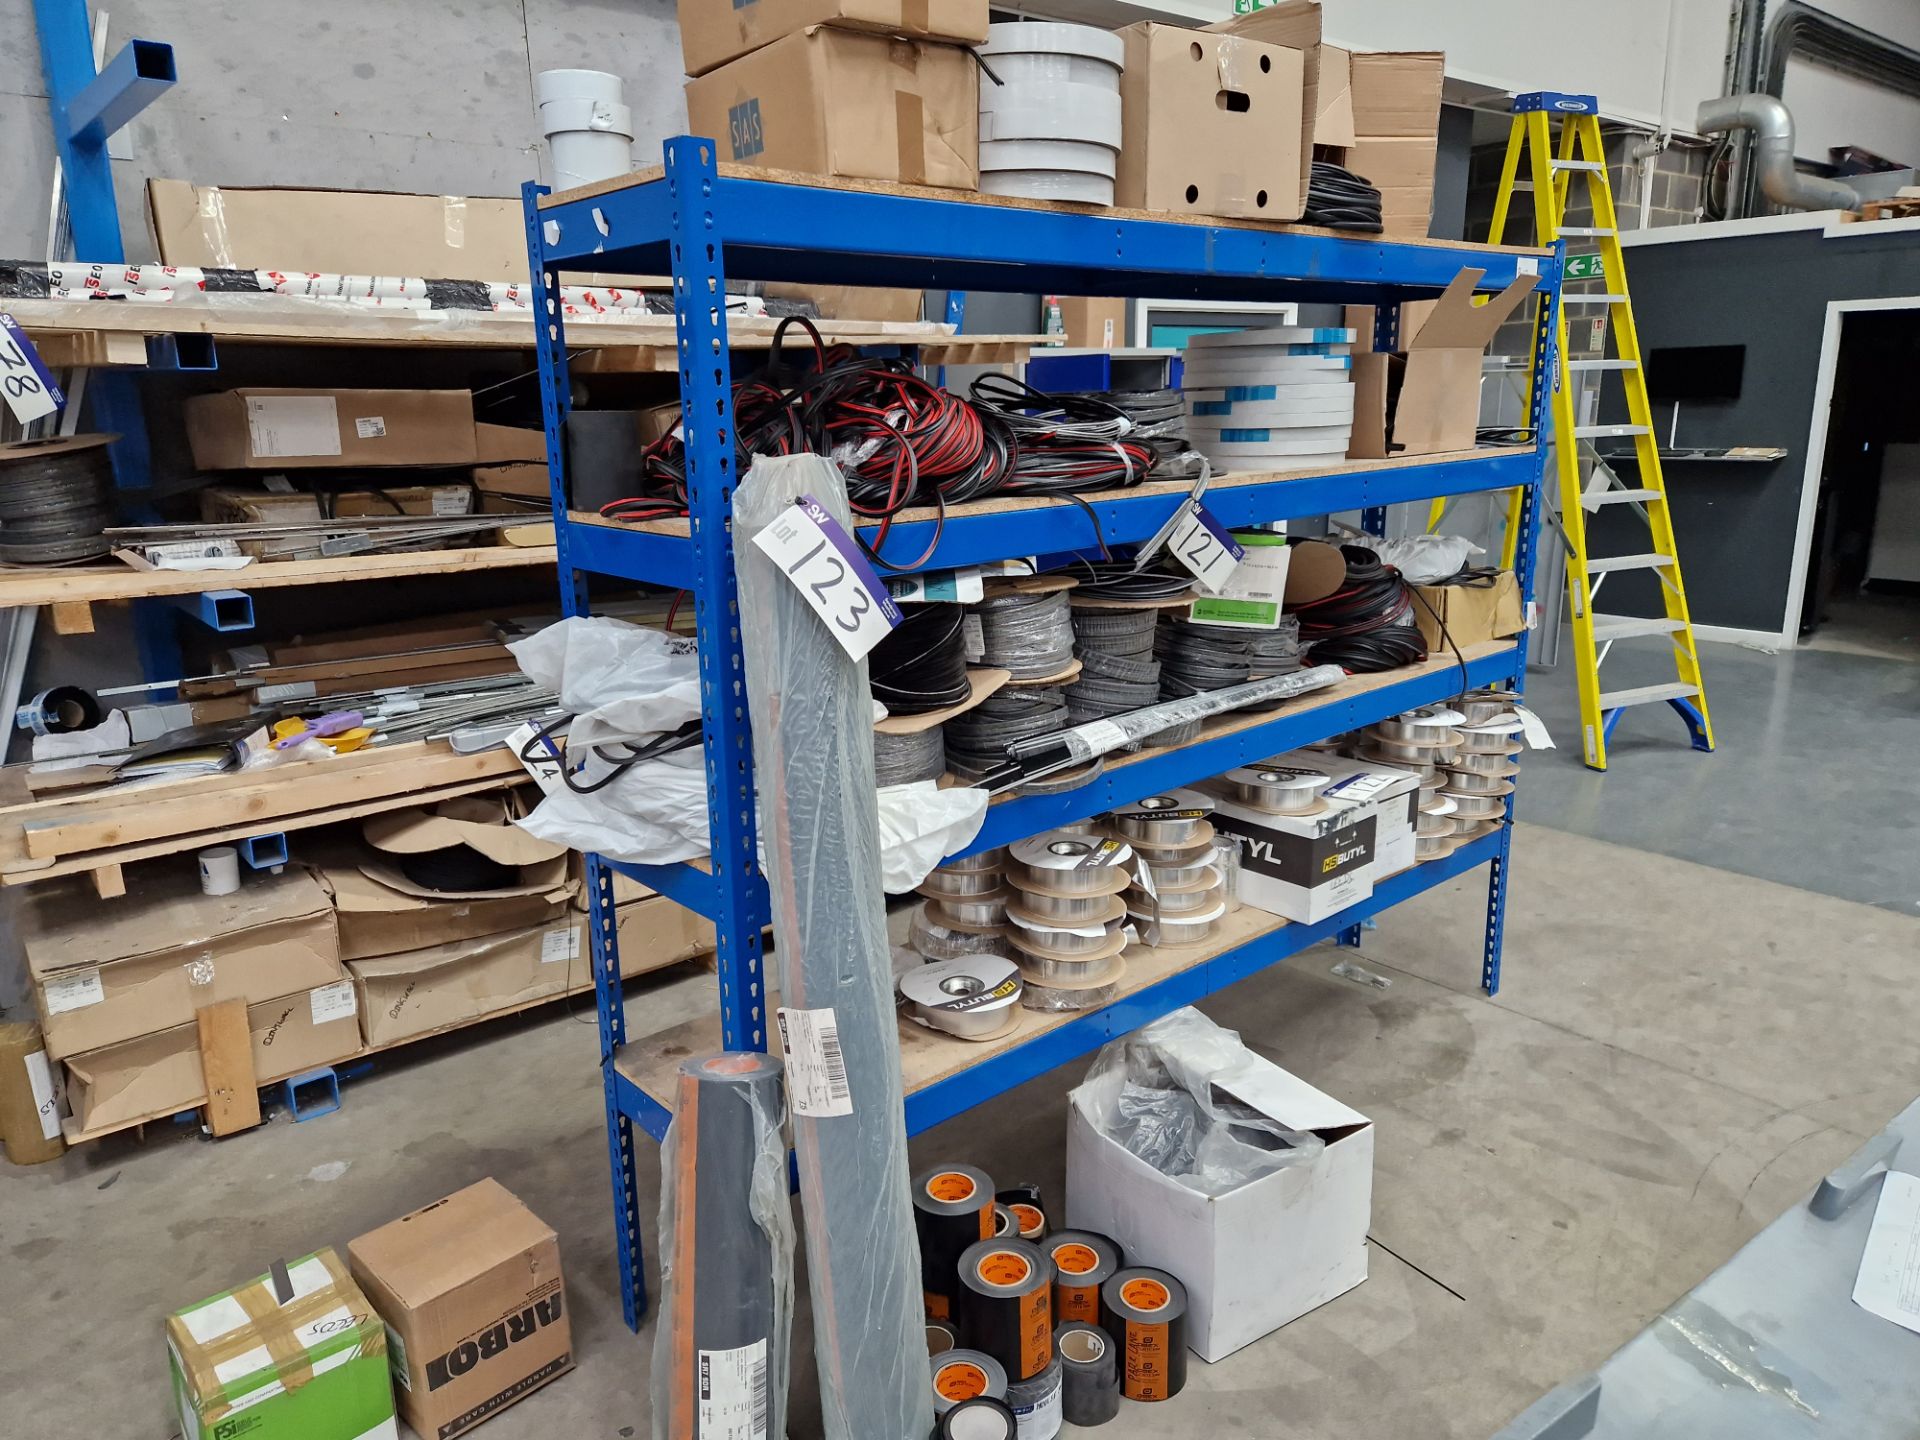 Four Bays of 4 Tier Boltless Steel Shelving, Approx. 2.5m x 0.5m x 2m (Reserve Removal until - Bild 2 aus 2